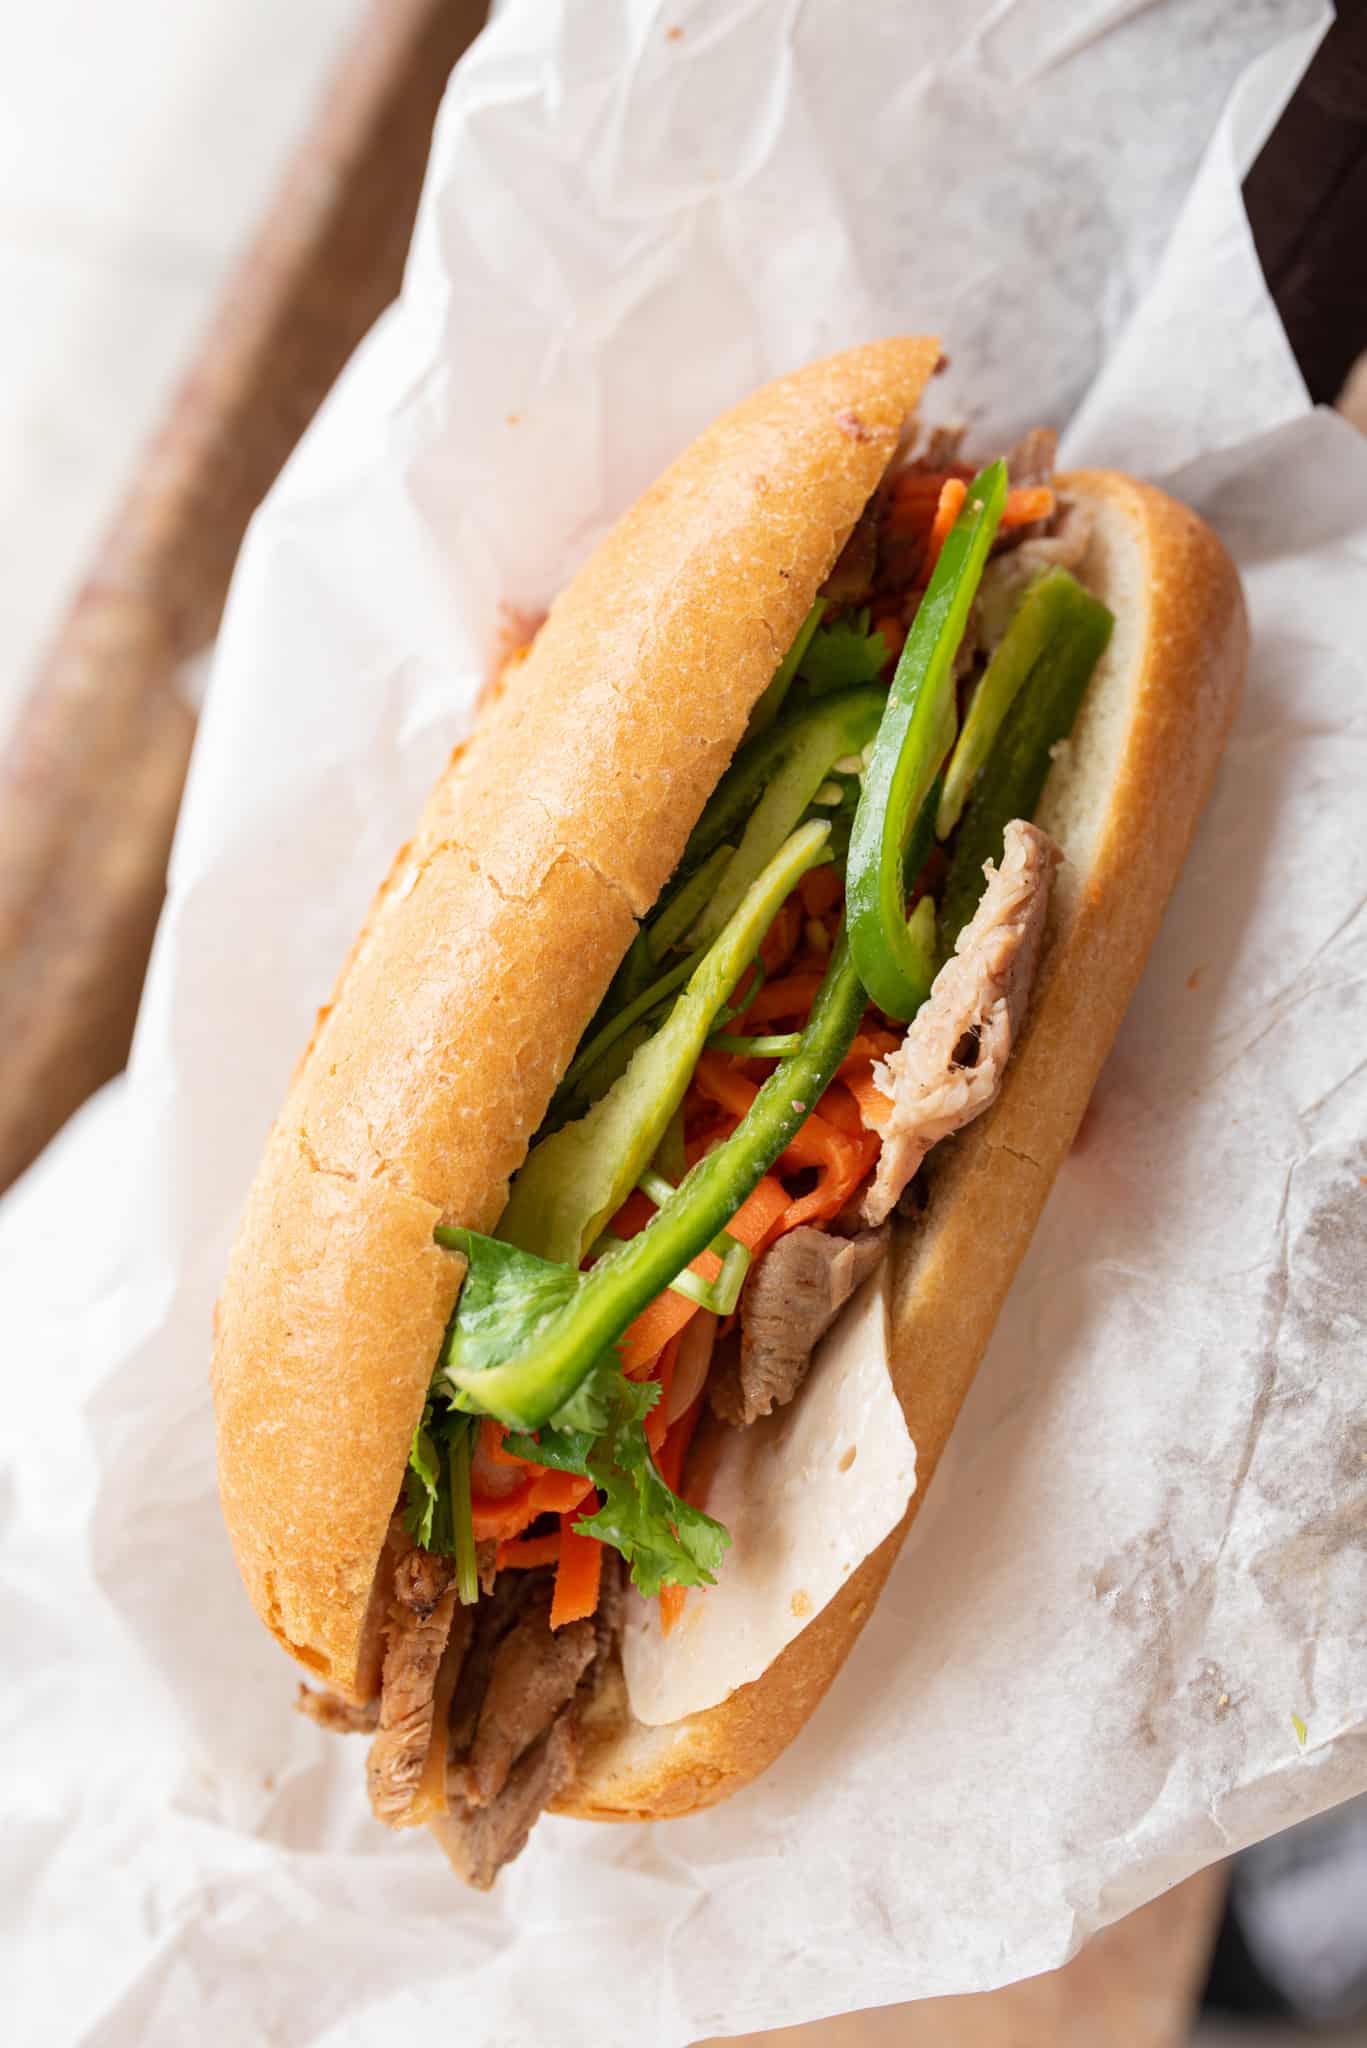 Saigon Sandwich's Banh Mi- steamed and roasted pork, pate, carrots, and jalapenos on a fresh French roll